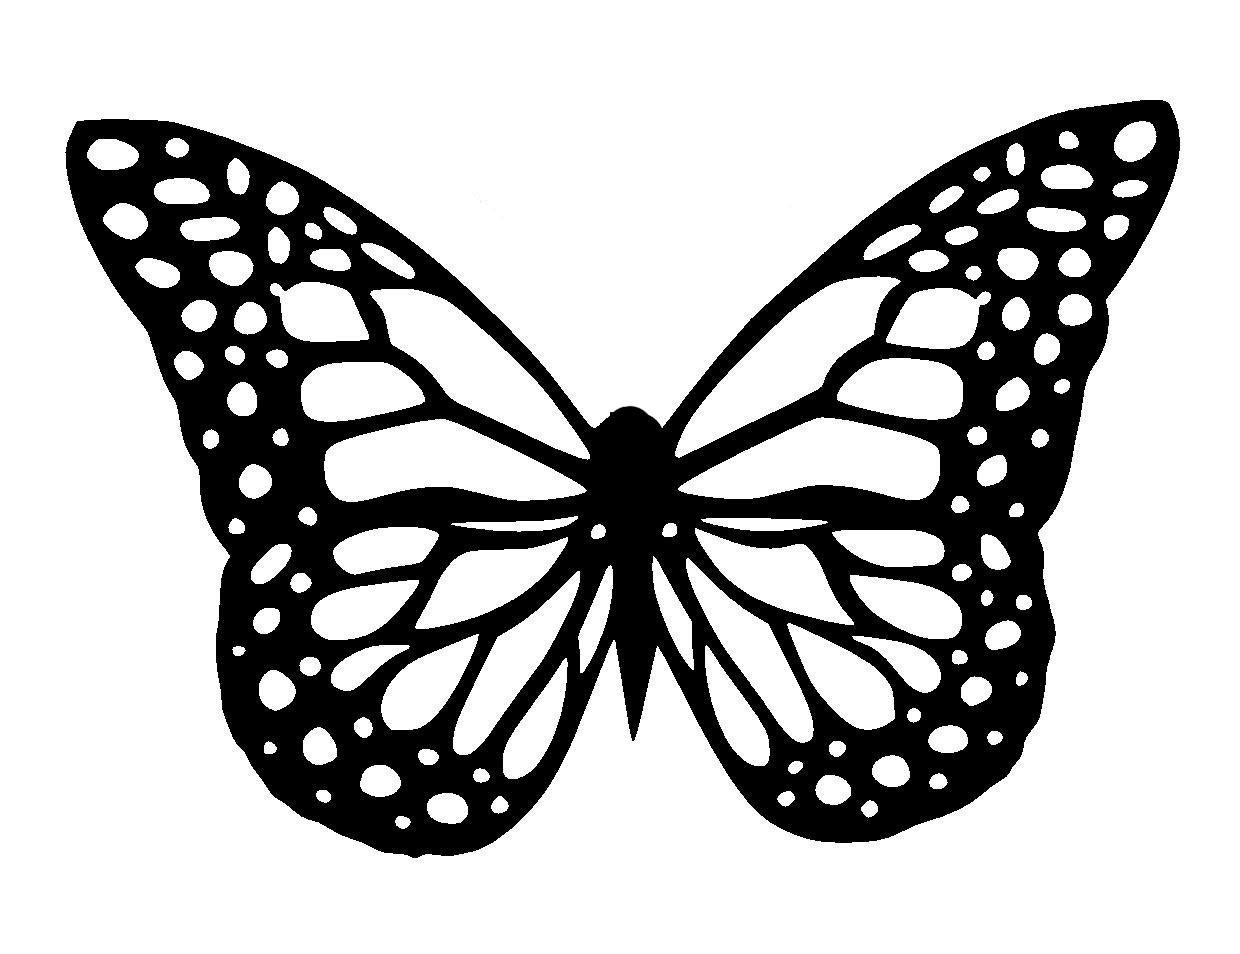 5883 butterfly stencil and template design 1 a5